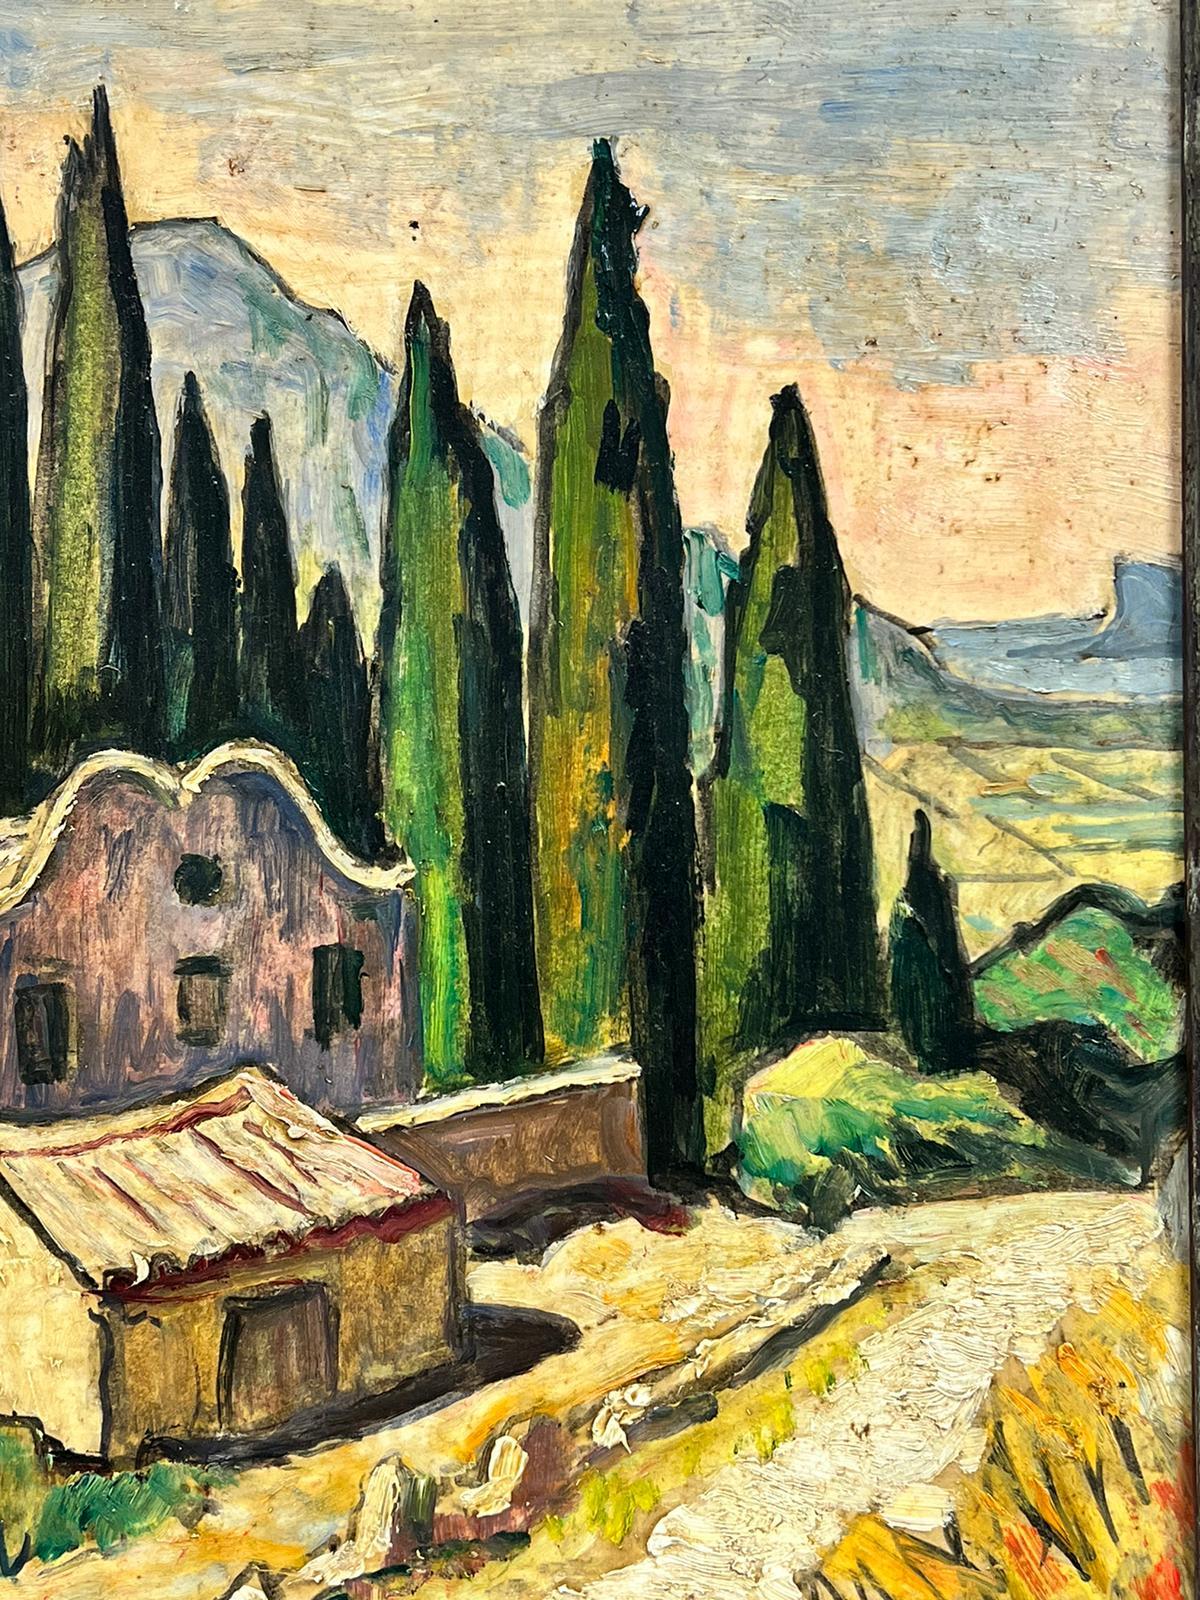 The Luberon Valley
Jean Julian (French 1888-1975)
inscribed verso
signed oil on canvas, framed
framed: 20 x 20 inches
canvas: 15.5 x 15.5 inches
private collection, France
the painting is in overall very good and sound condition. 